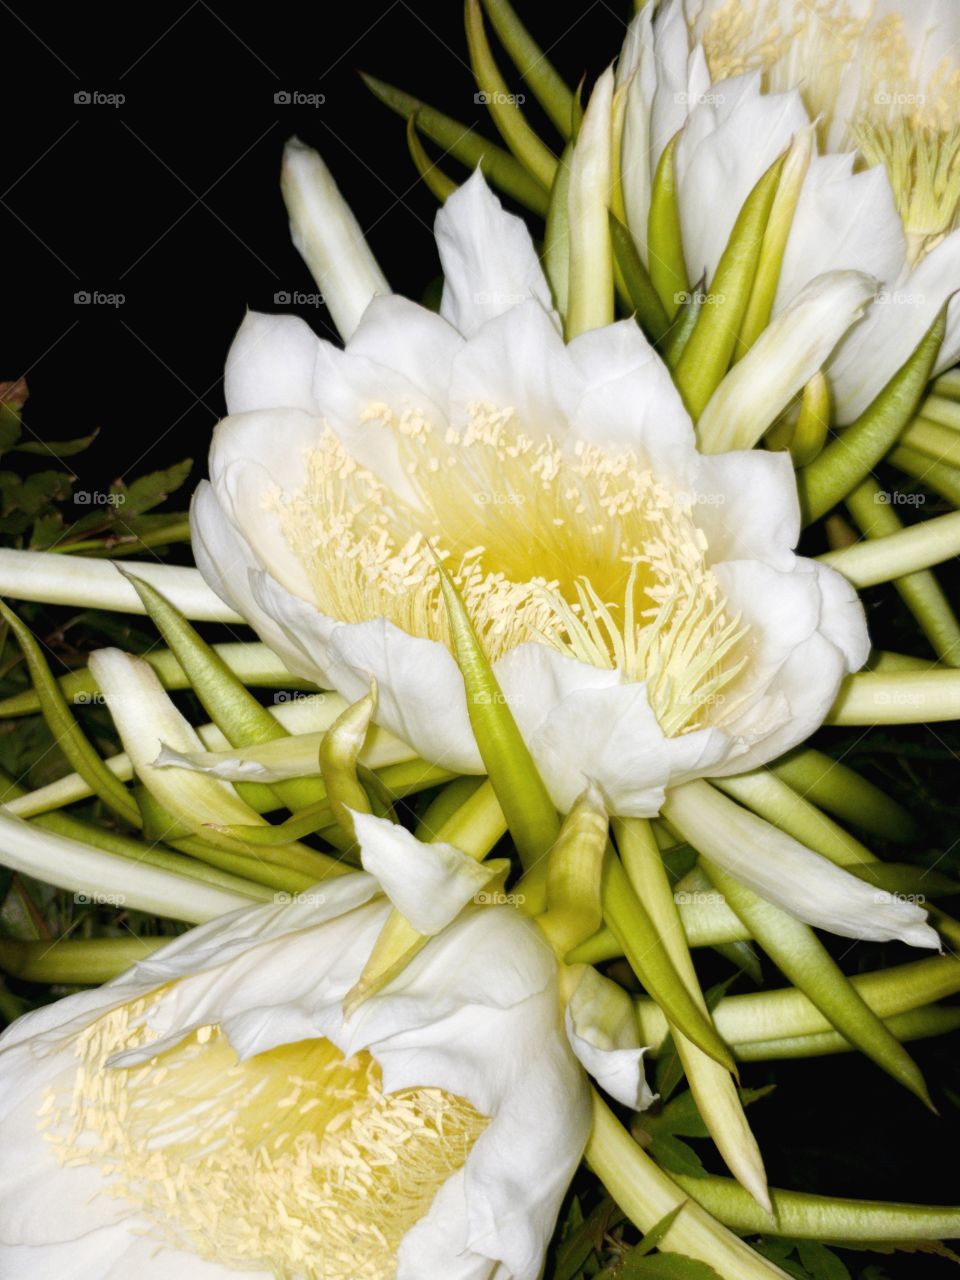 A row of rare white tropical flowers arranged in a diagonal line. Direct camera flash was applied in very low lighting. These flowers eminates a distinct incense-like fragrance, and open only for one night. They wither by the morning.